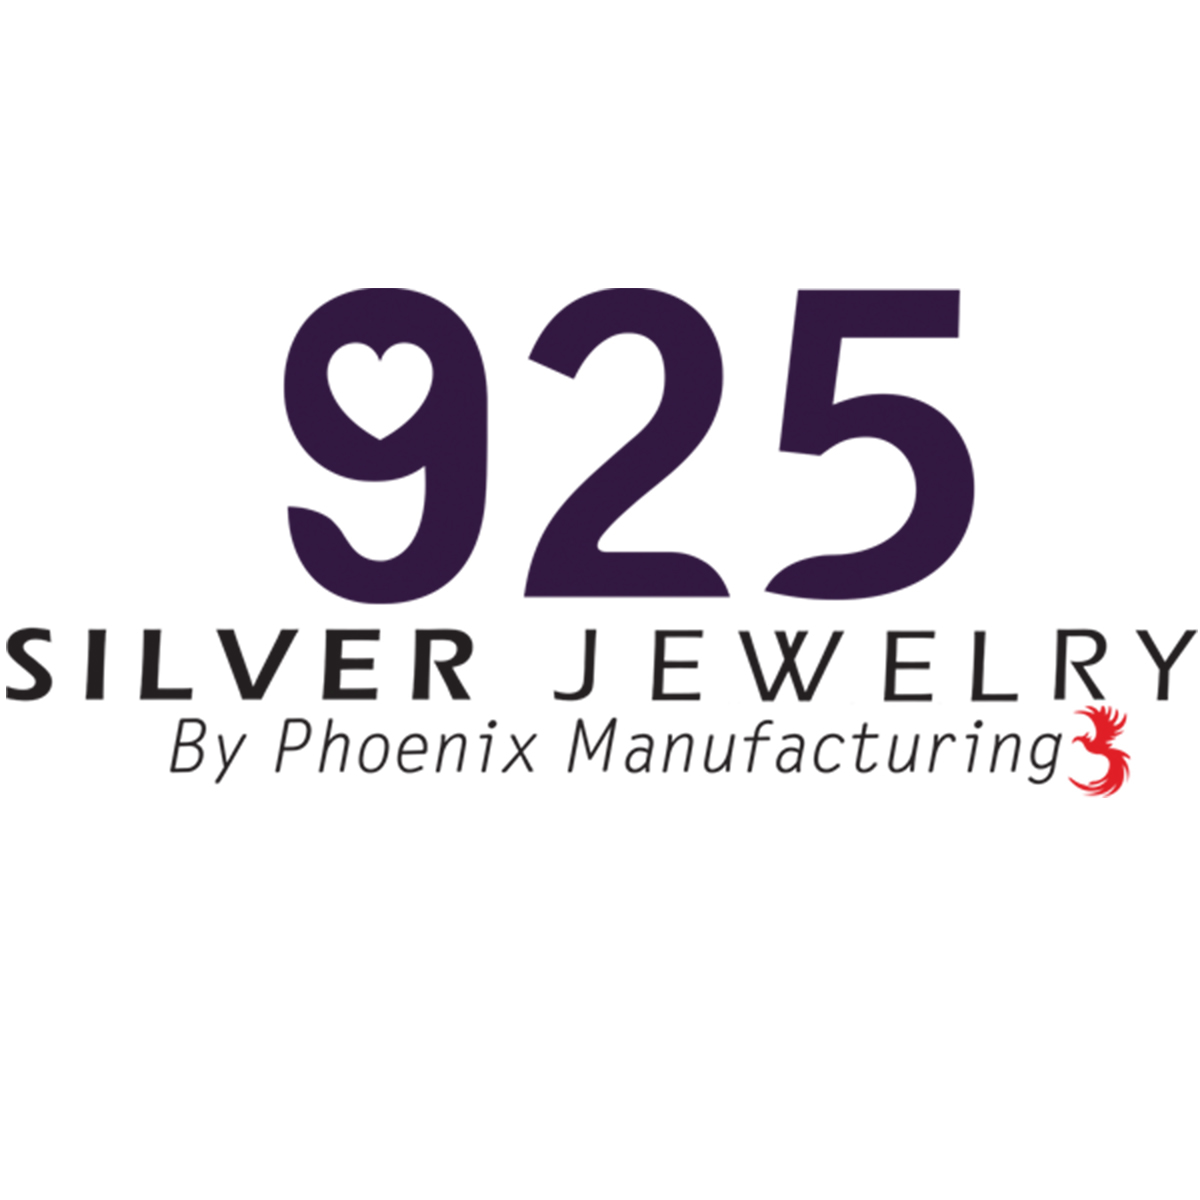 925 Silver Jewelry | Wholesale Sterling Silver Jewelry Supplier